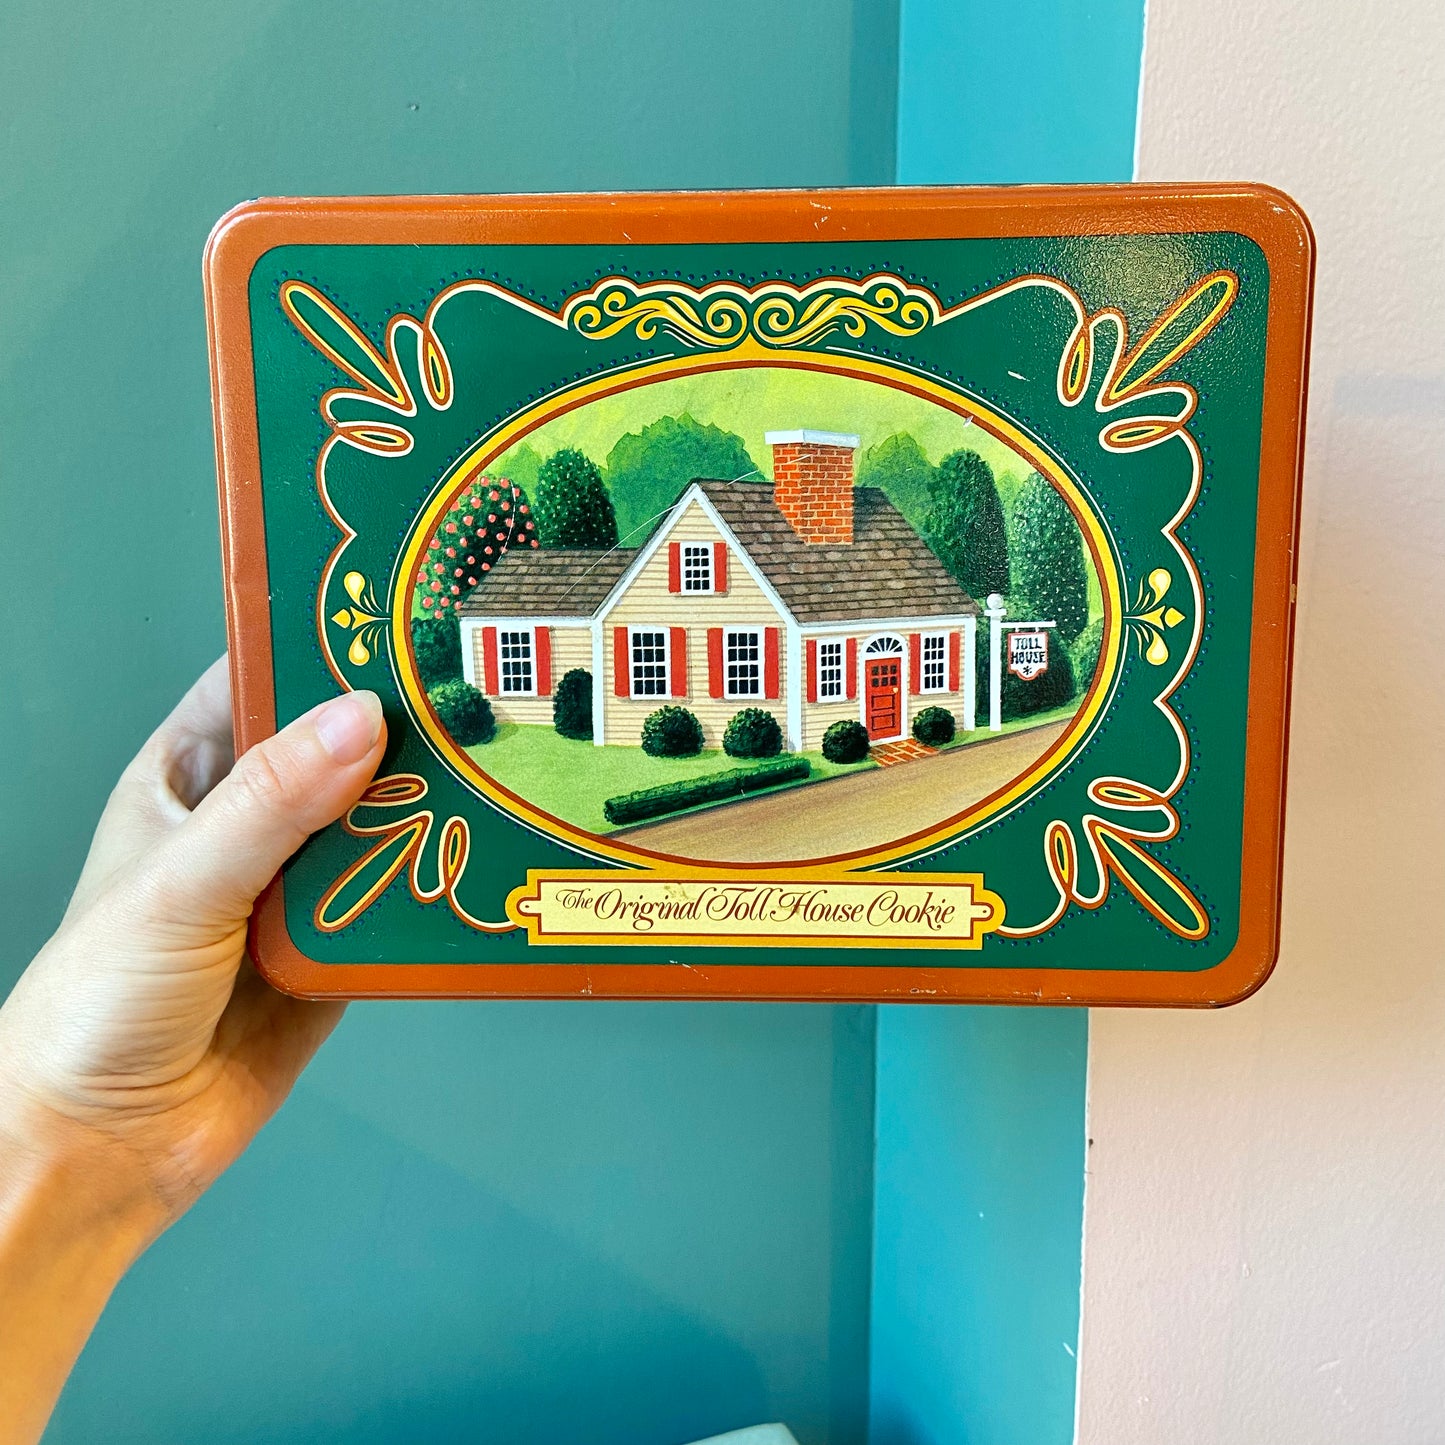 Vintage Toll House Cookie Tin Box